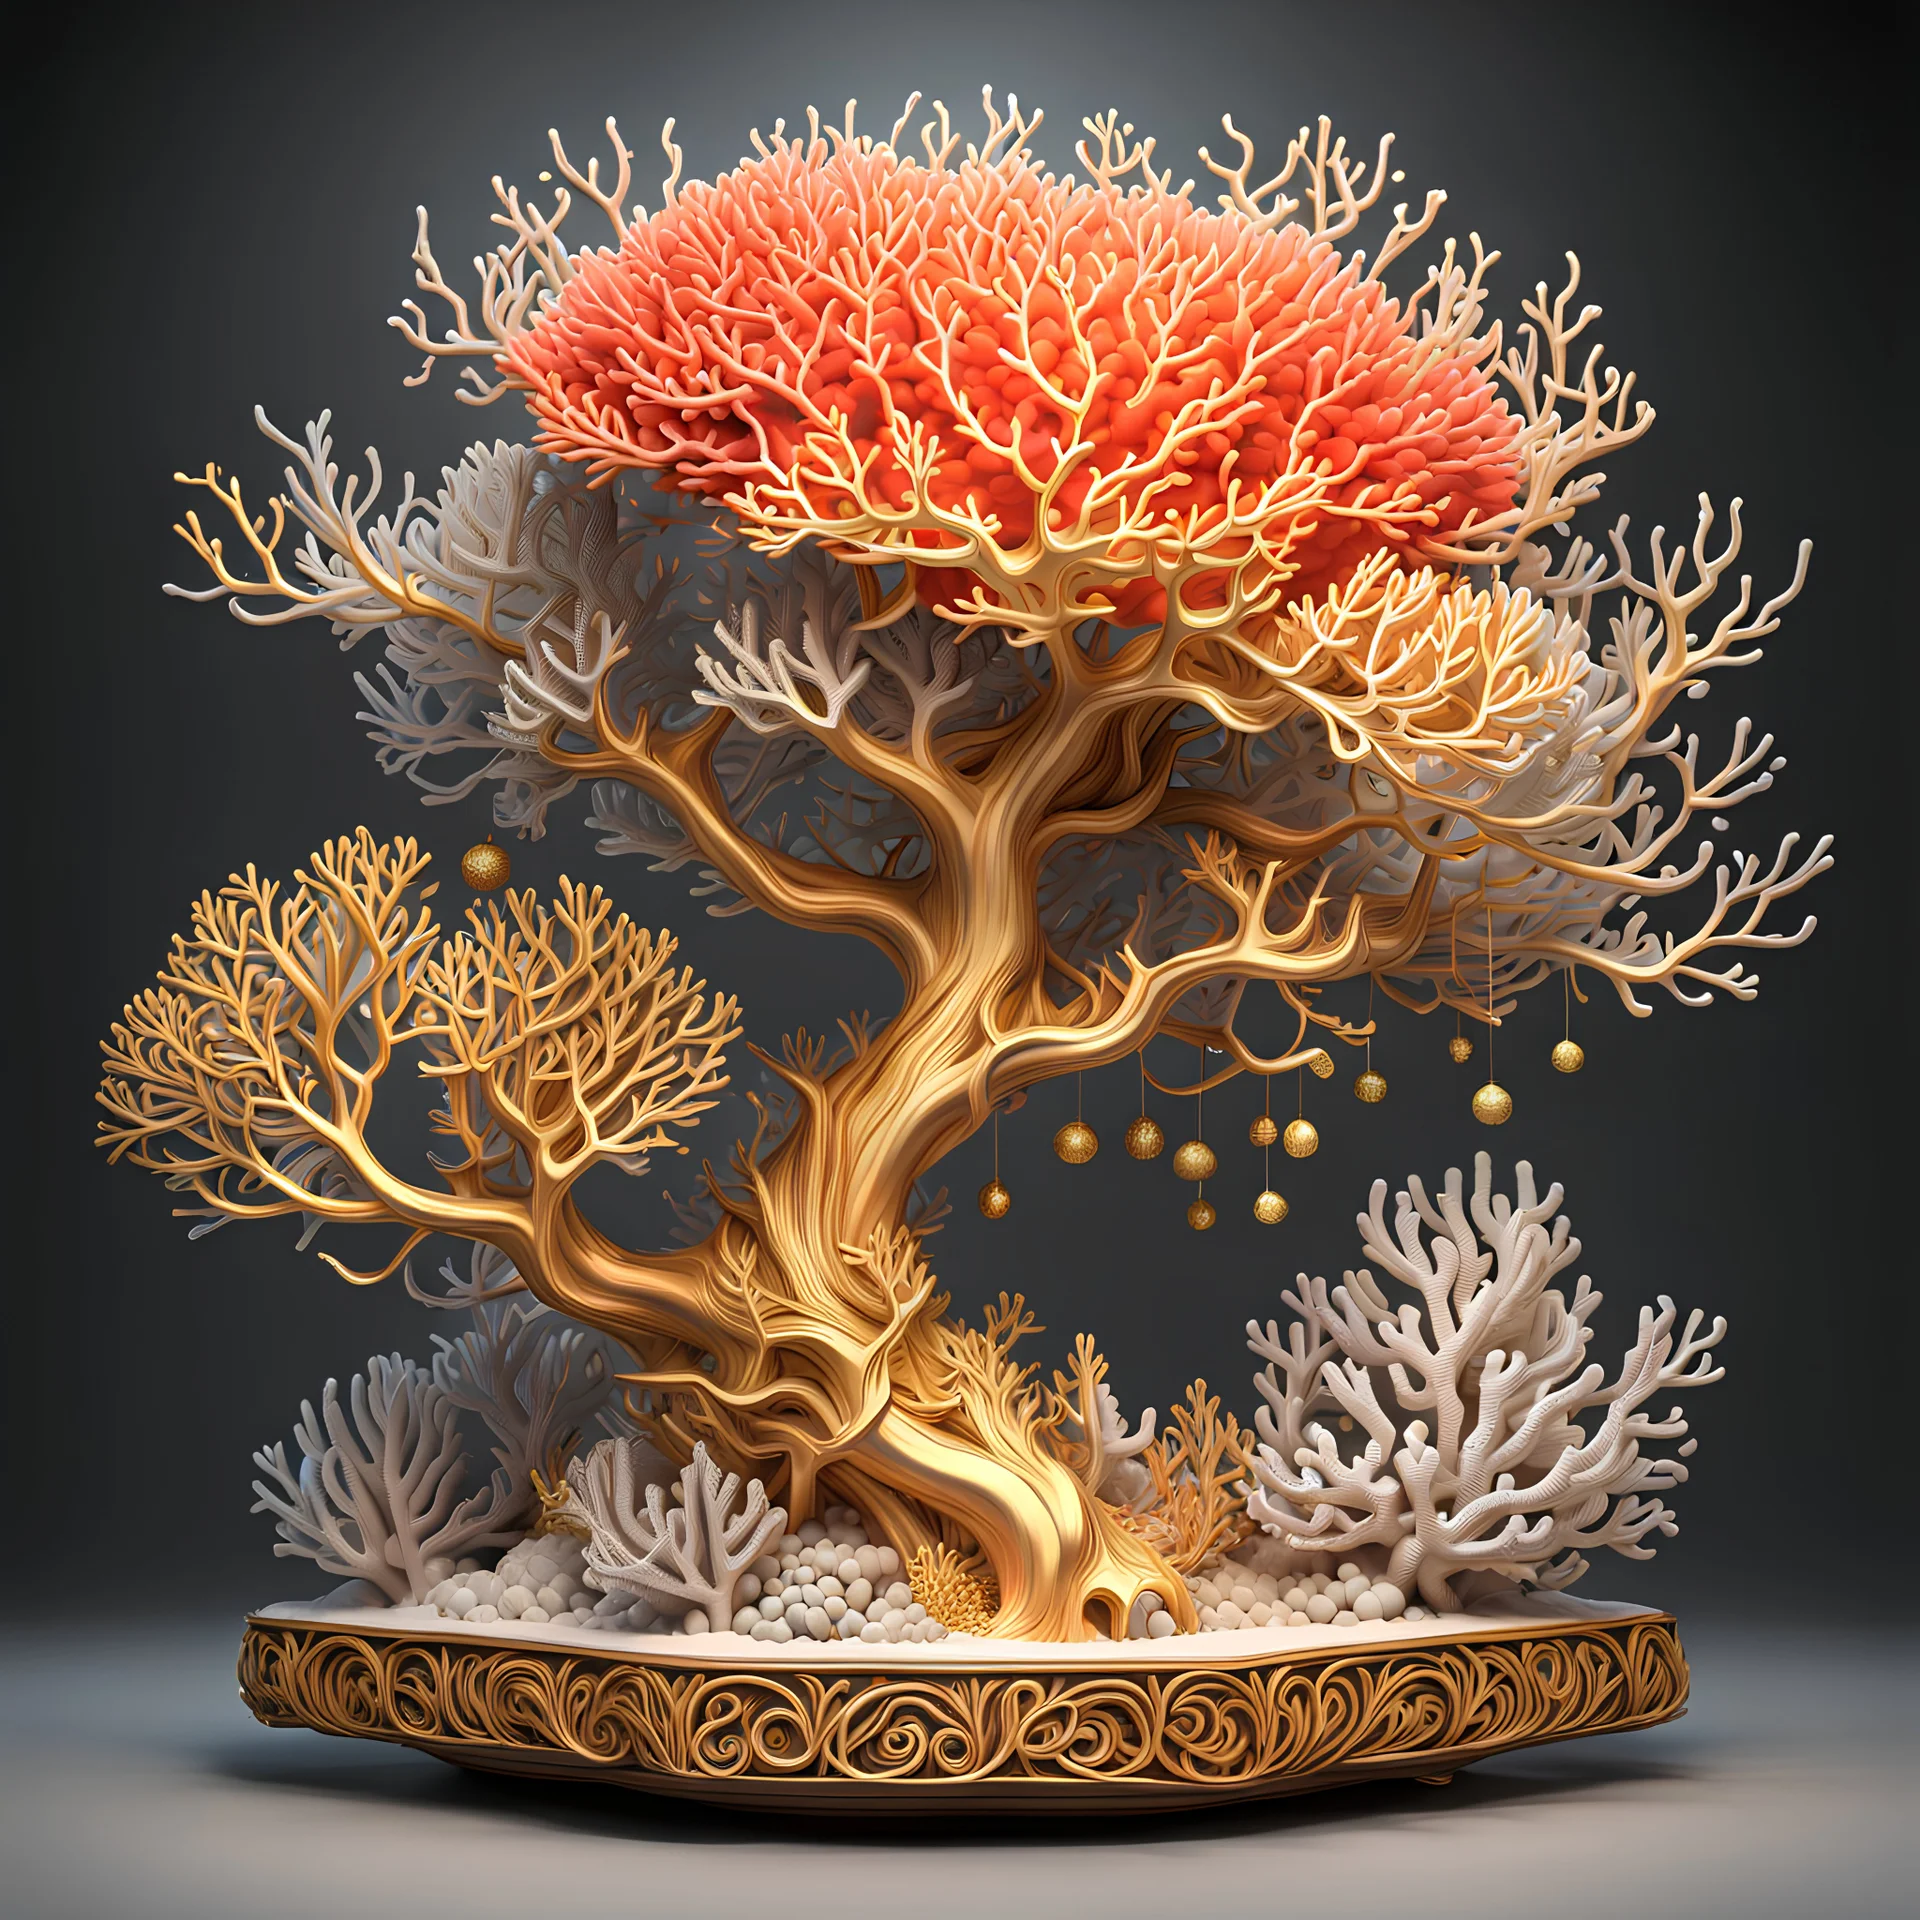 3D rendering of Expressively detailed and intricate of a hyperrealistic “coral”: side view, single object, amazing shinning gold, vines,